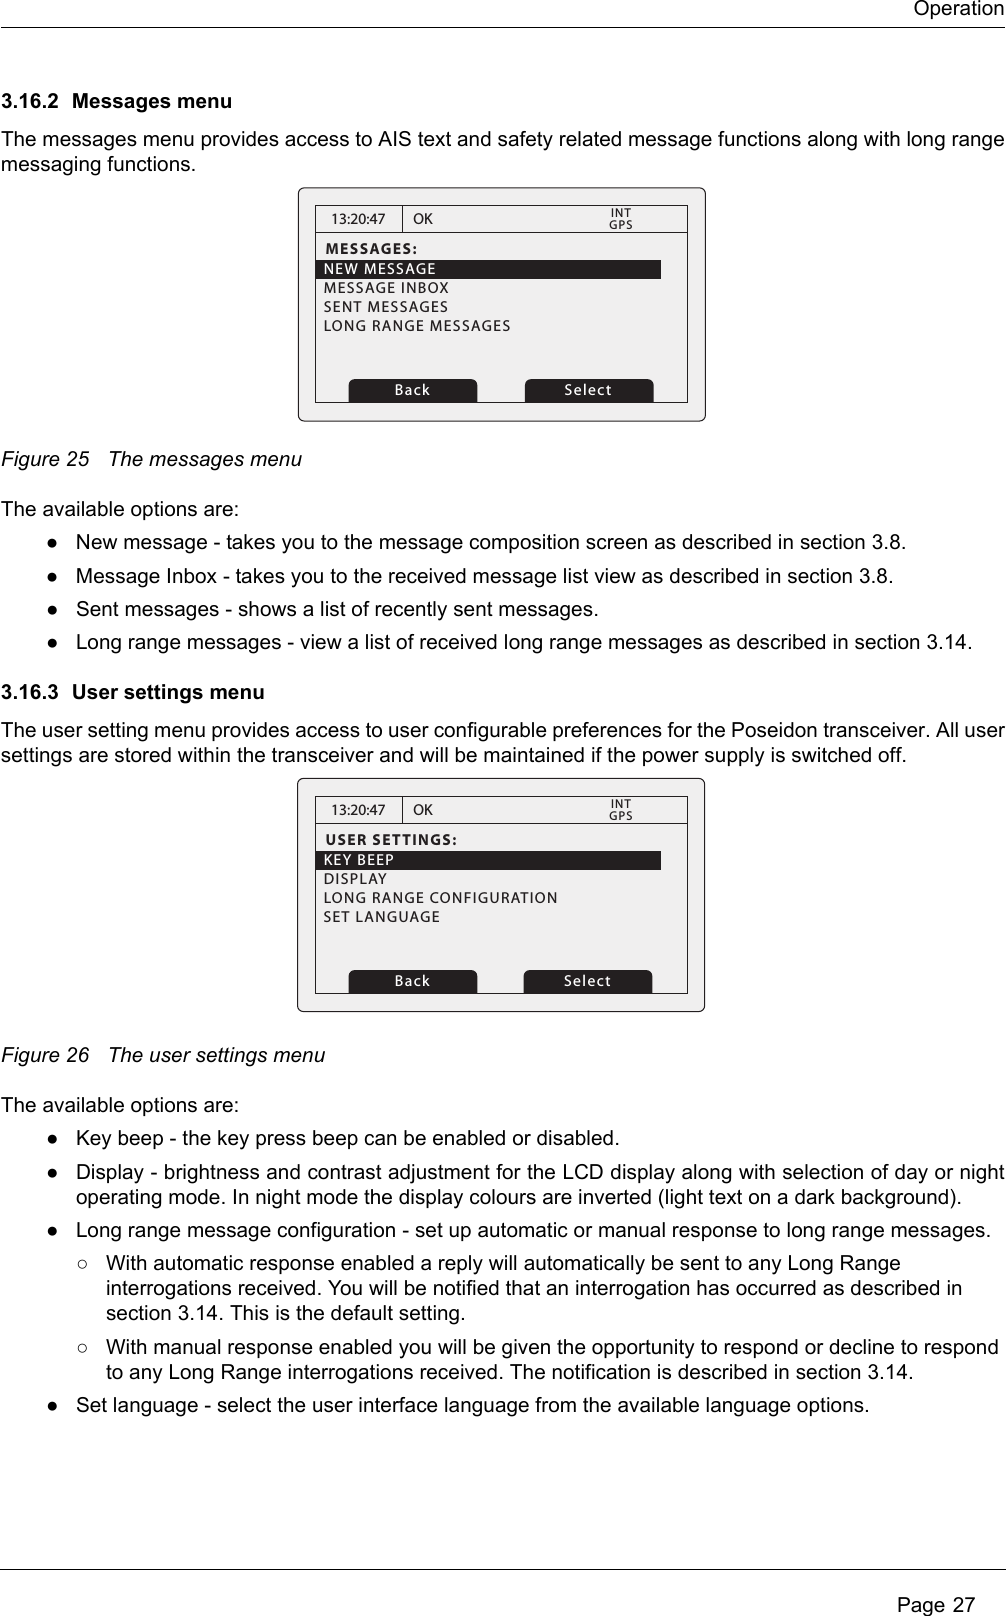 OperationPage 273.16.2 Messages menuThe messages menu provides access to AIS text and safety related message functions along with long rangemessaging functions. Figure 25 The messages menuThe available options are:●New message - takes you to the message composition screen as described in section 3.8.●Message Inbox - takes you to the received message list view as described in section 3.8.●Sent messages - shows a list of recently sent messages.●Long range messages - view a list of received long range messages as described in section 3.14.3.16.3 User settings menuThe user setting menu provides access to user configurable preferences for the Poseidon transceiver. All usersettings are stored within the transceiver and will be maintained if the power supply is switched off. Figure 26 The user settings menuThe available options are:●Key beep - the key press beep can be enabled or disabled.●Display - brightness and contrast adjustment for the LCD display along with selection of day or nightoperating mode. In night mode the display colours are inverted (light text on a dark background). ●Long range message configuration - set up automatic or manual response to long range messages.○With automatic response enabled a reply will automatically be sent to any Long Range interrogations received. You will be notified that an interrogation has occurred as described in section 3.14. This is the default setting.○With manual response enabled you will be given the opportunity to respond or decline to respond to any Long Range interrogations received. The notification is described in section 3.14.●Set language - select the user interface language from the available language options. 13:20:47MESSAGES:NEW MESSAGEMESSAGE INBOXSENT MESSAGESLONG RANGE MESSAGESOKGPSINTBack Select13:20:47USER SETTINGS:KEY BEEPDISPLAYLONG RANGE CONFIGURATIONOKGPSINTBack SelectSET LANGUAGE